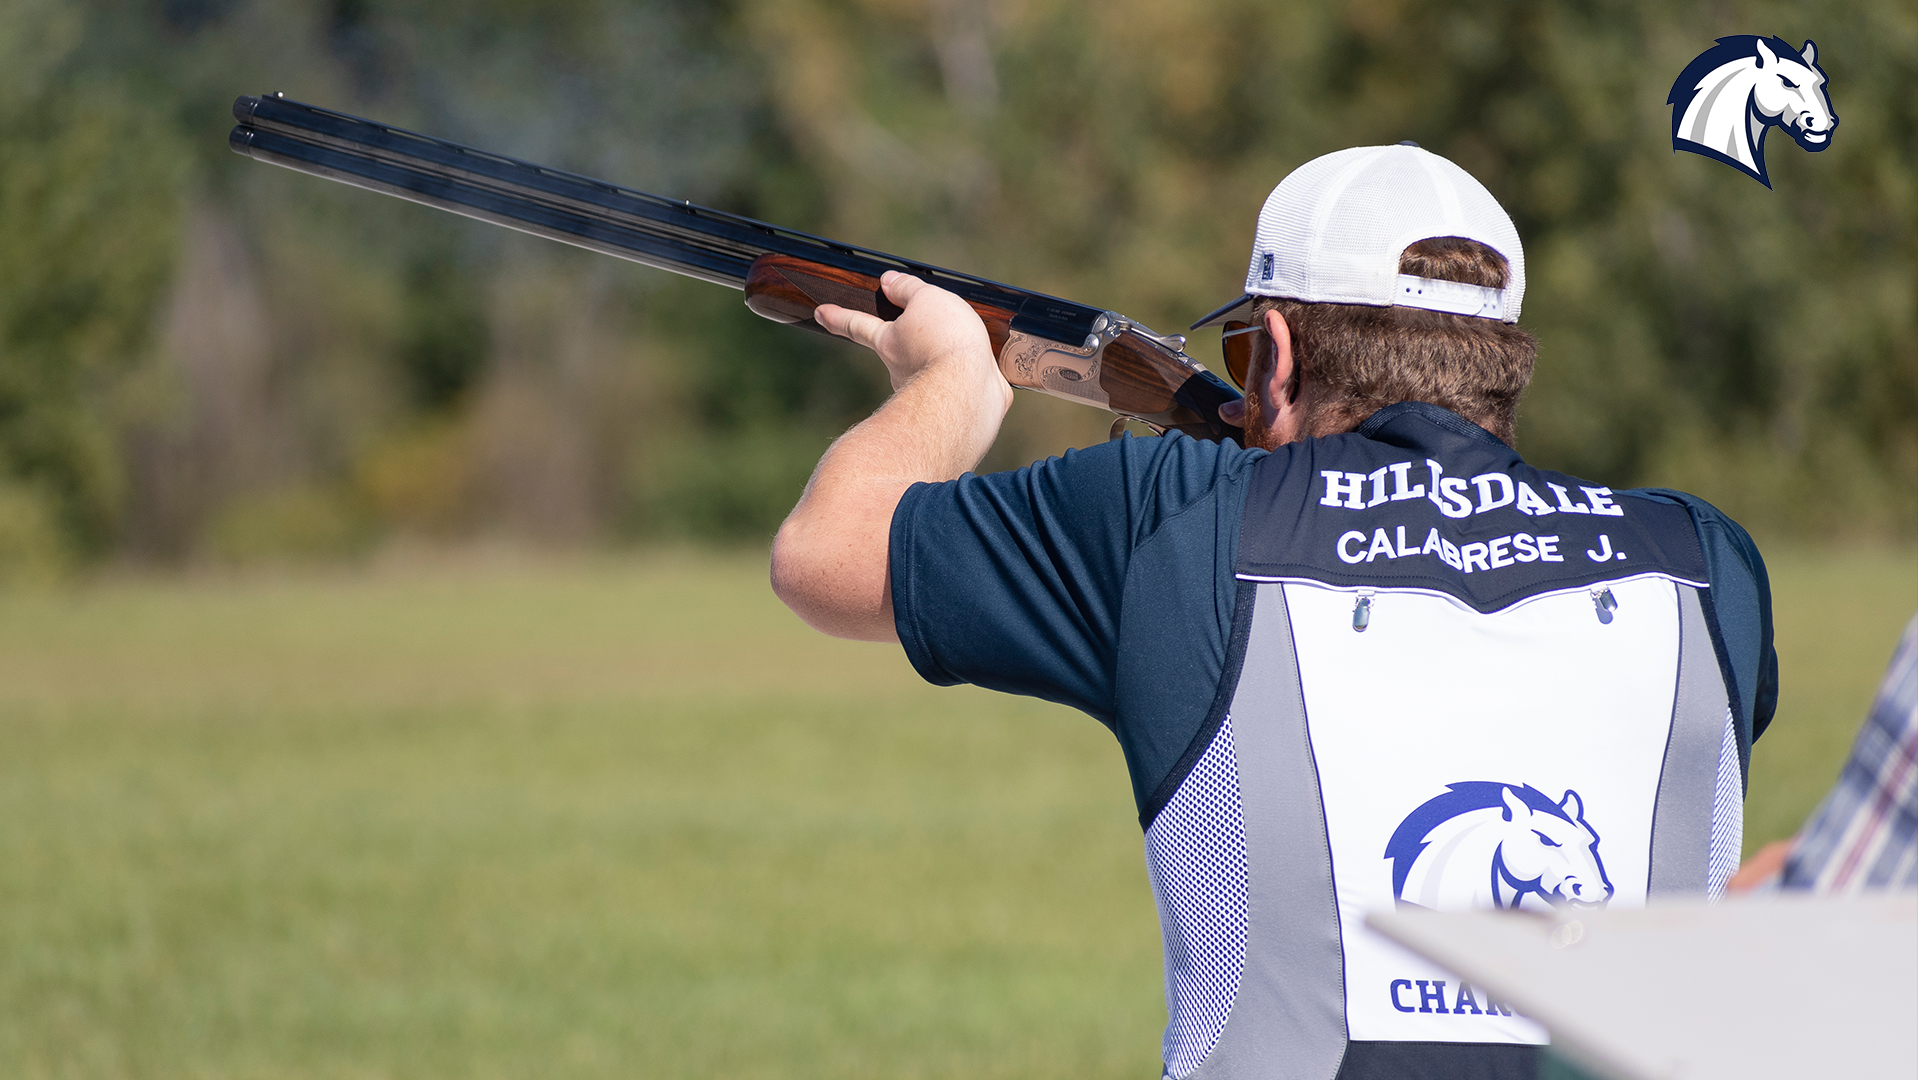 Hillsdale College shotgun team continues to grow in size and skill entering 2023-24 campaign